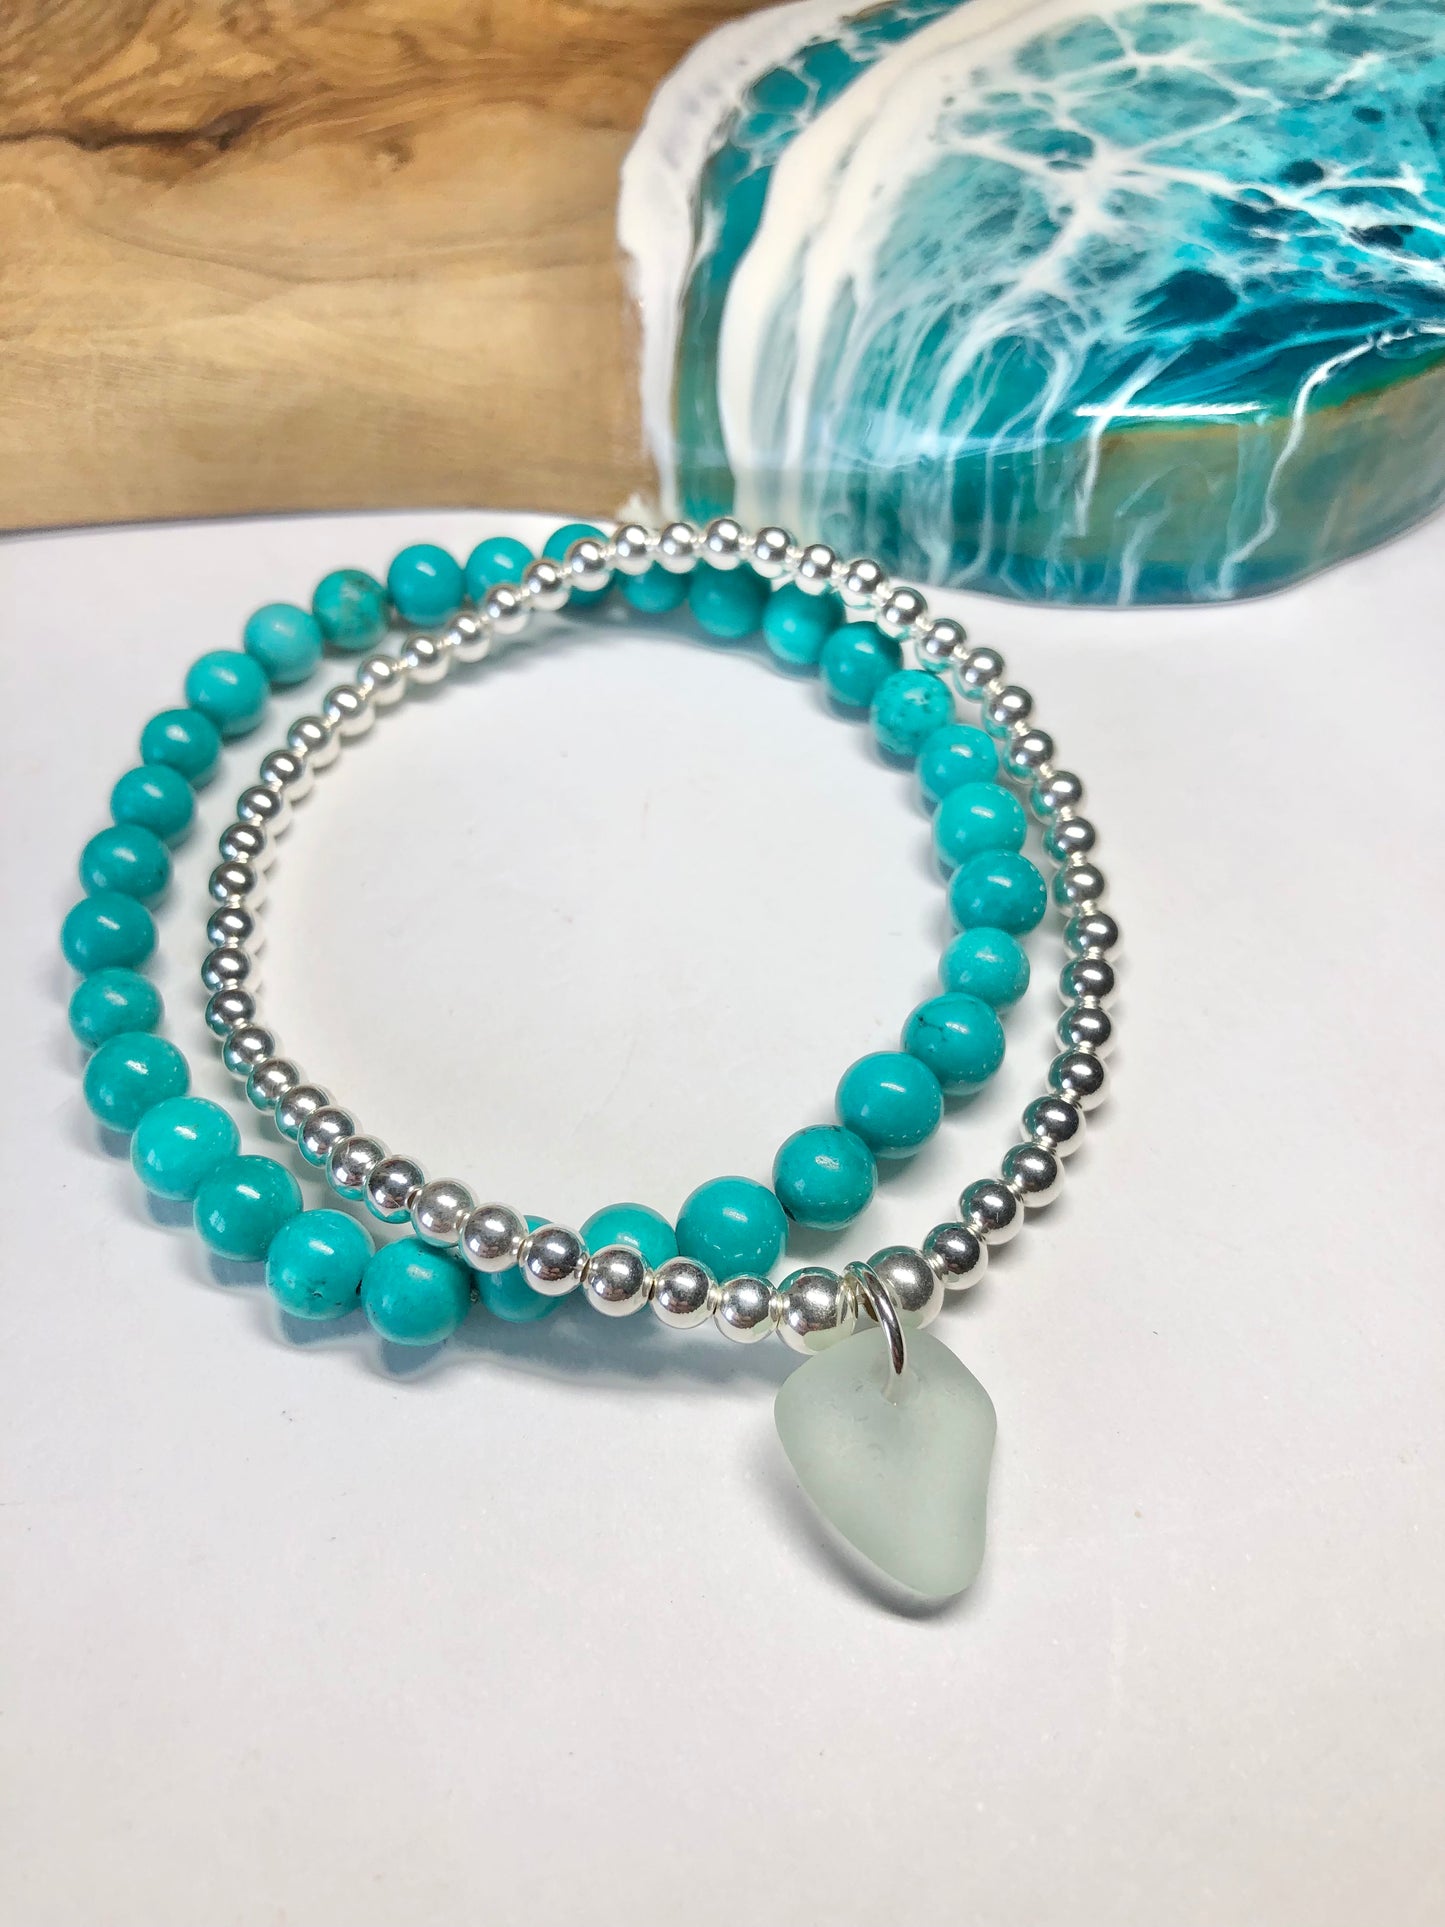 Sterling silver beaded bracelet with a Cornish sea glass charm